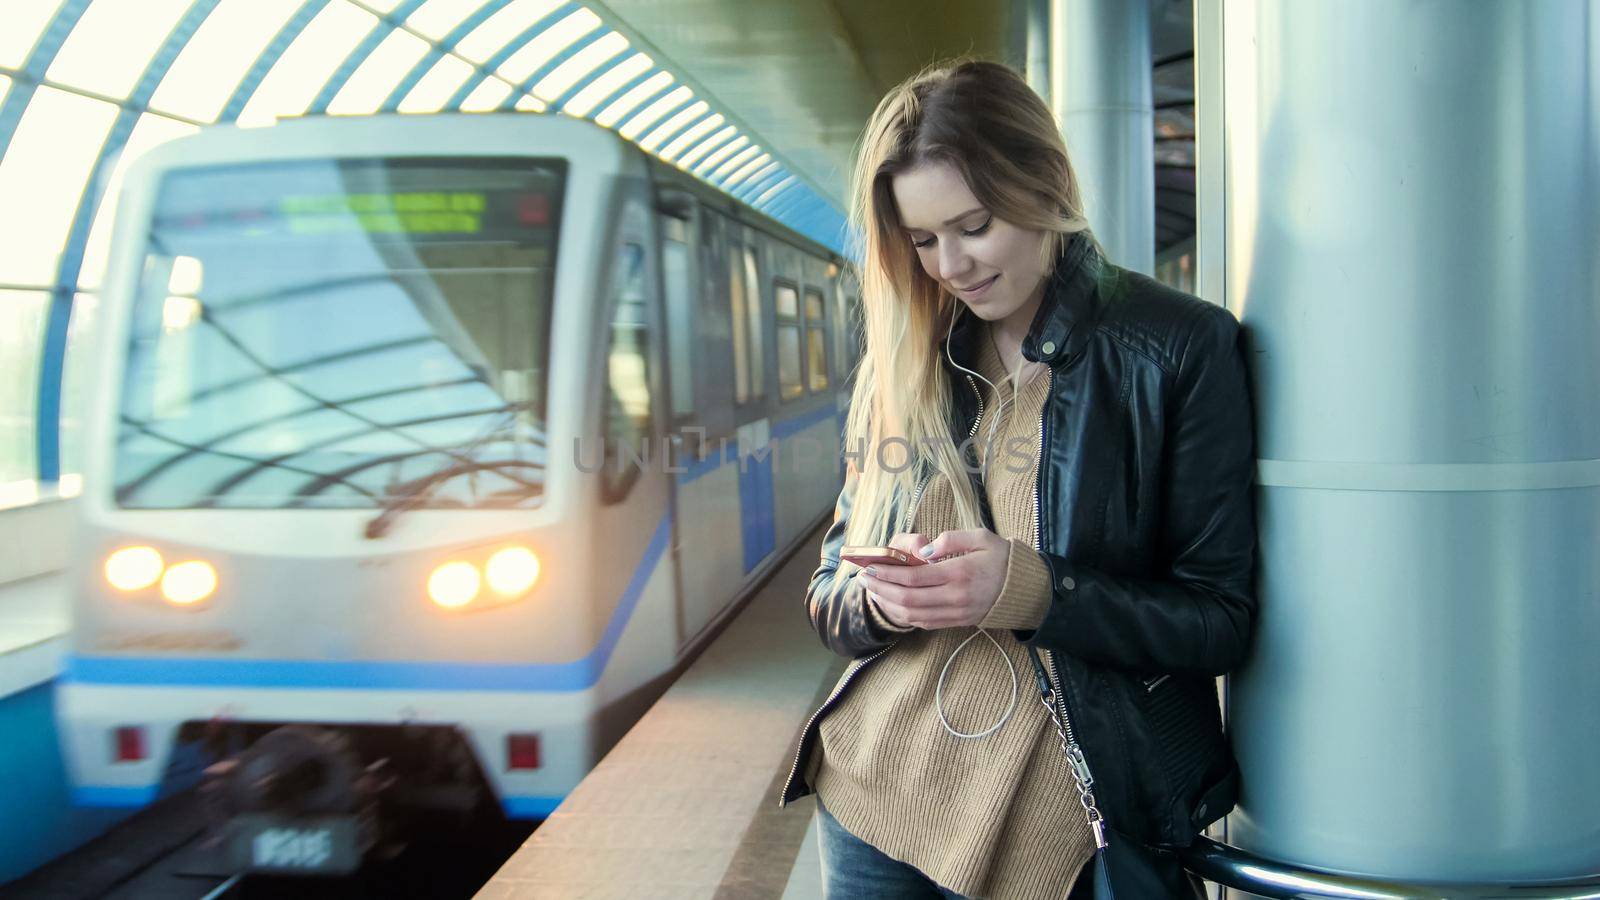 Attractive girl with gadget long blonde hair in leather jacket with straightens hair standing in metro against the background of a train coming, horizontal